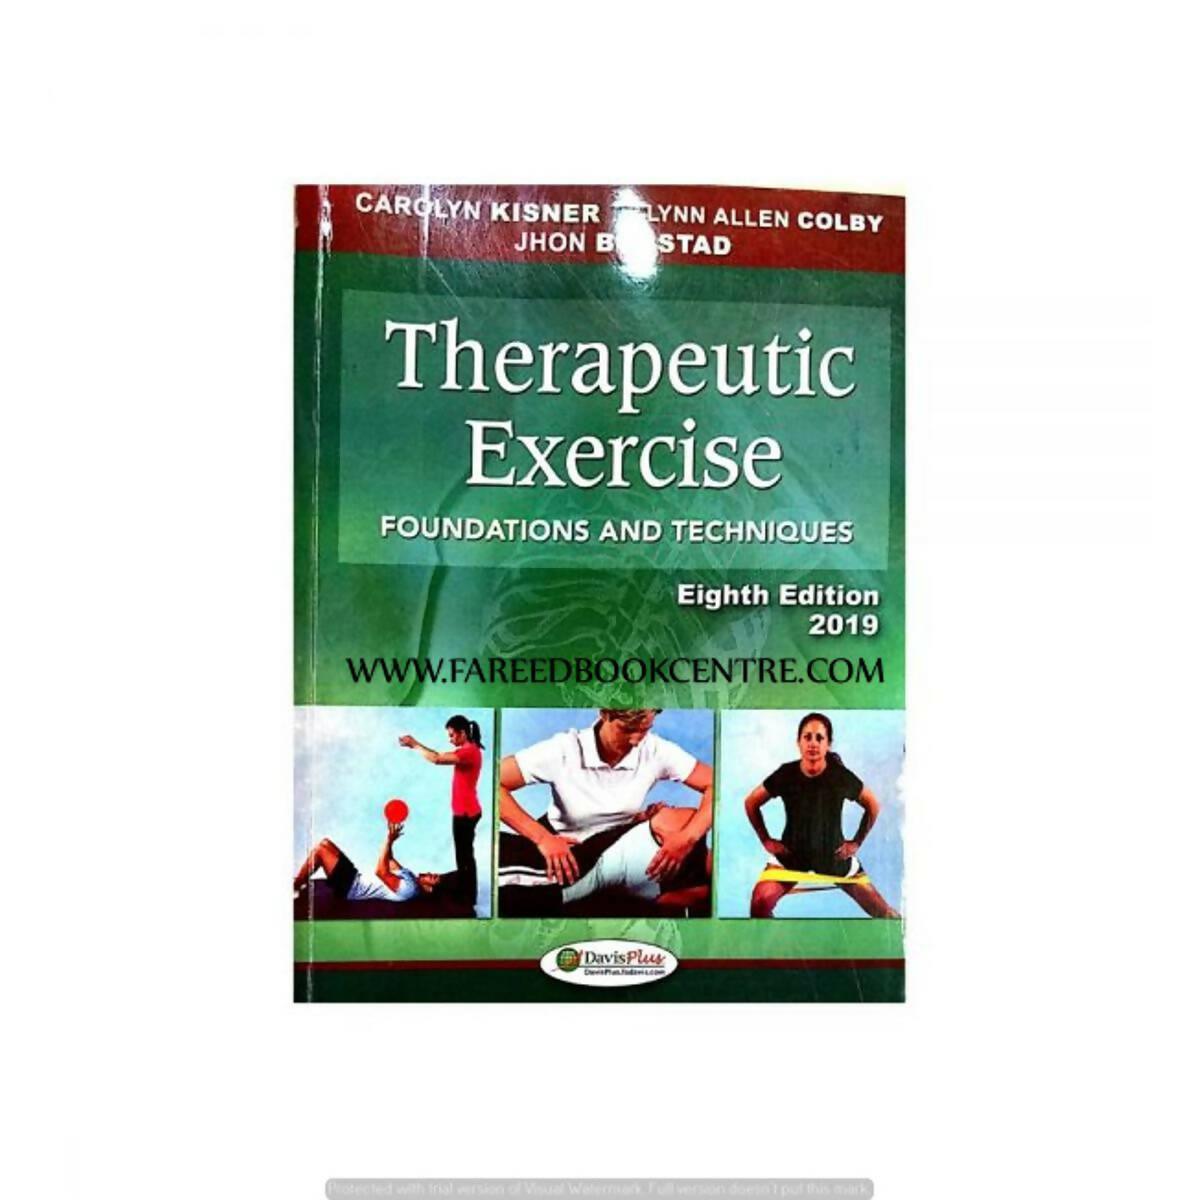 Therapeutic Exercise Foundations and Techniques, 8th Edition by Kisner - ValueBox